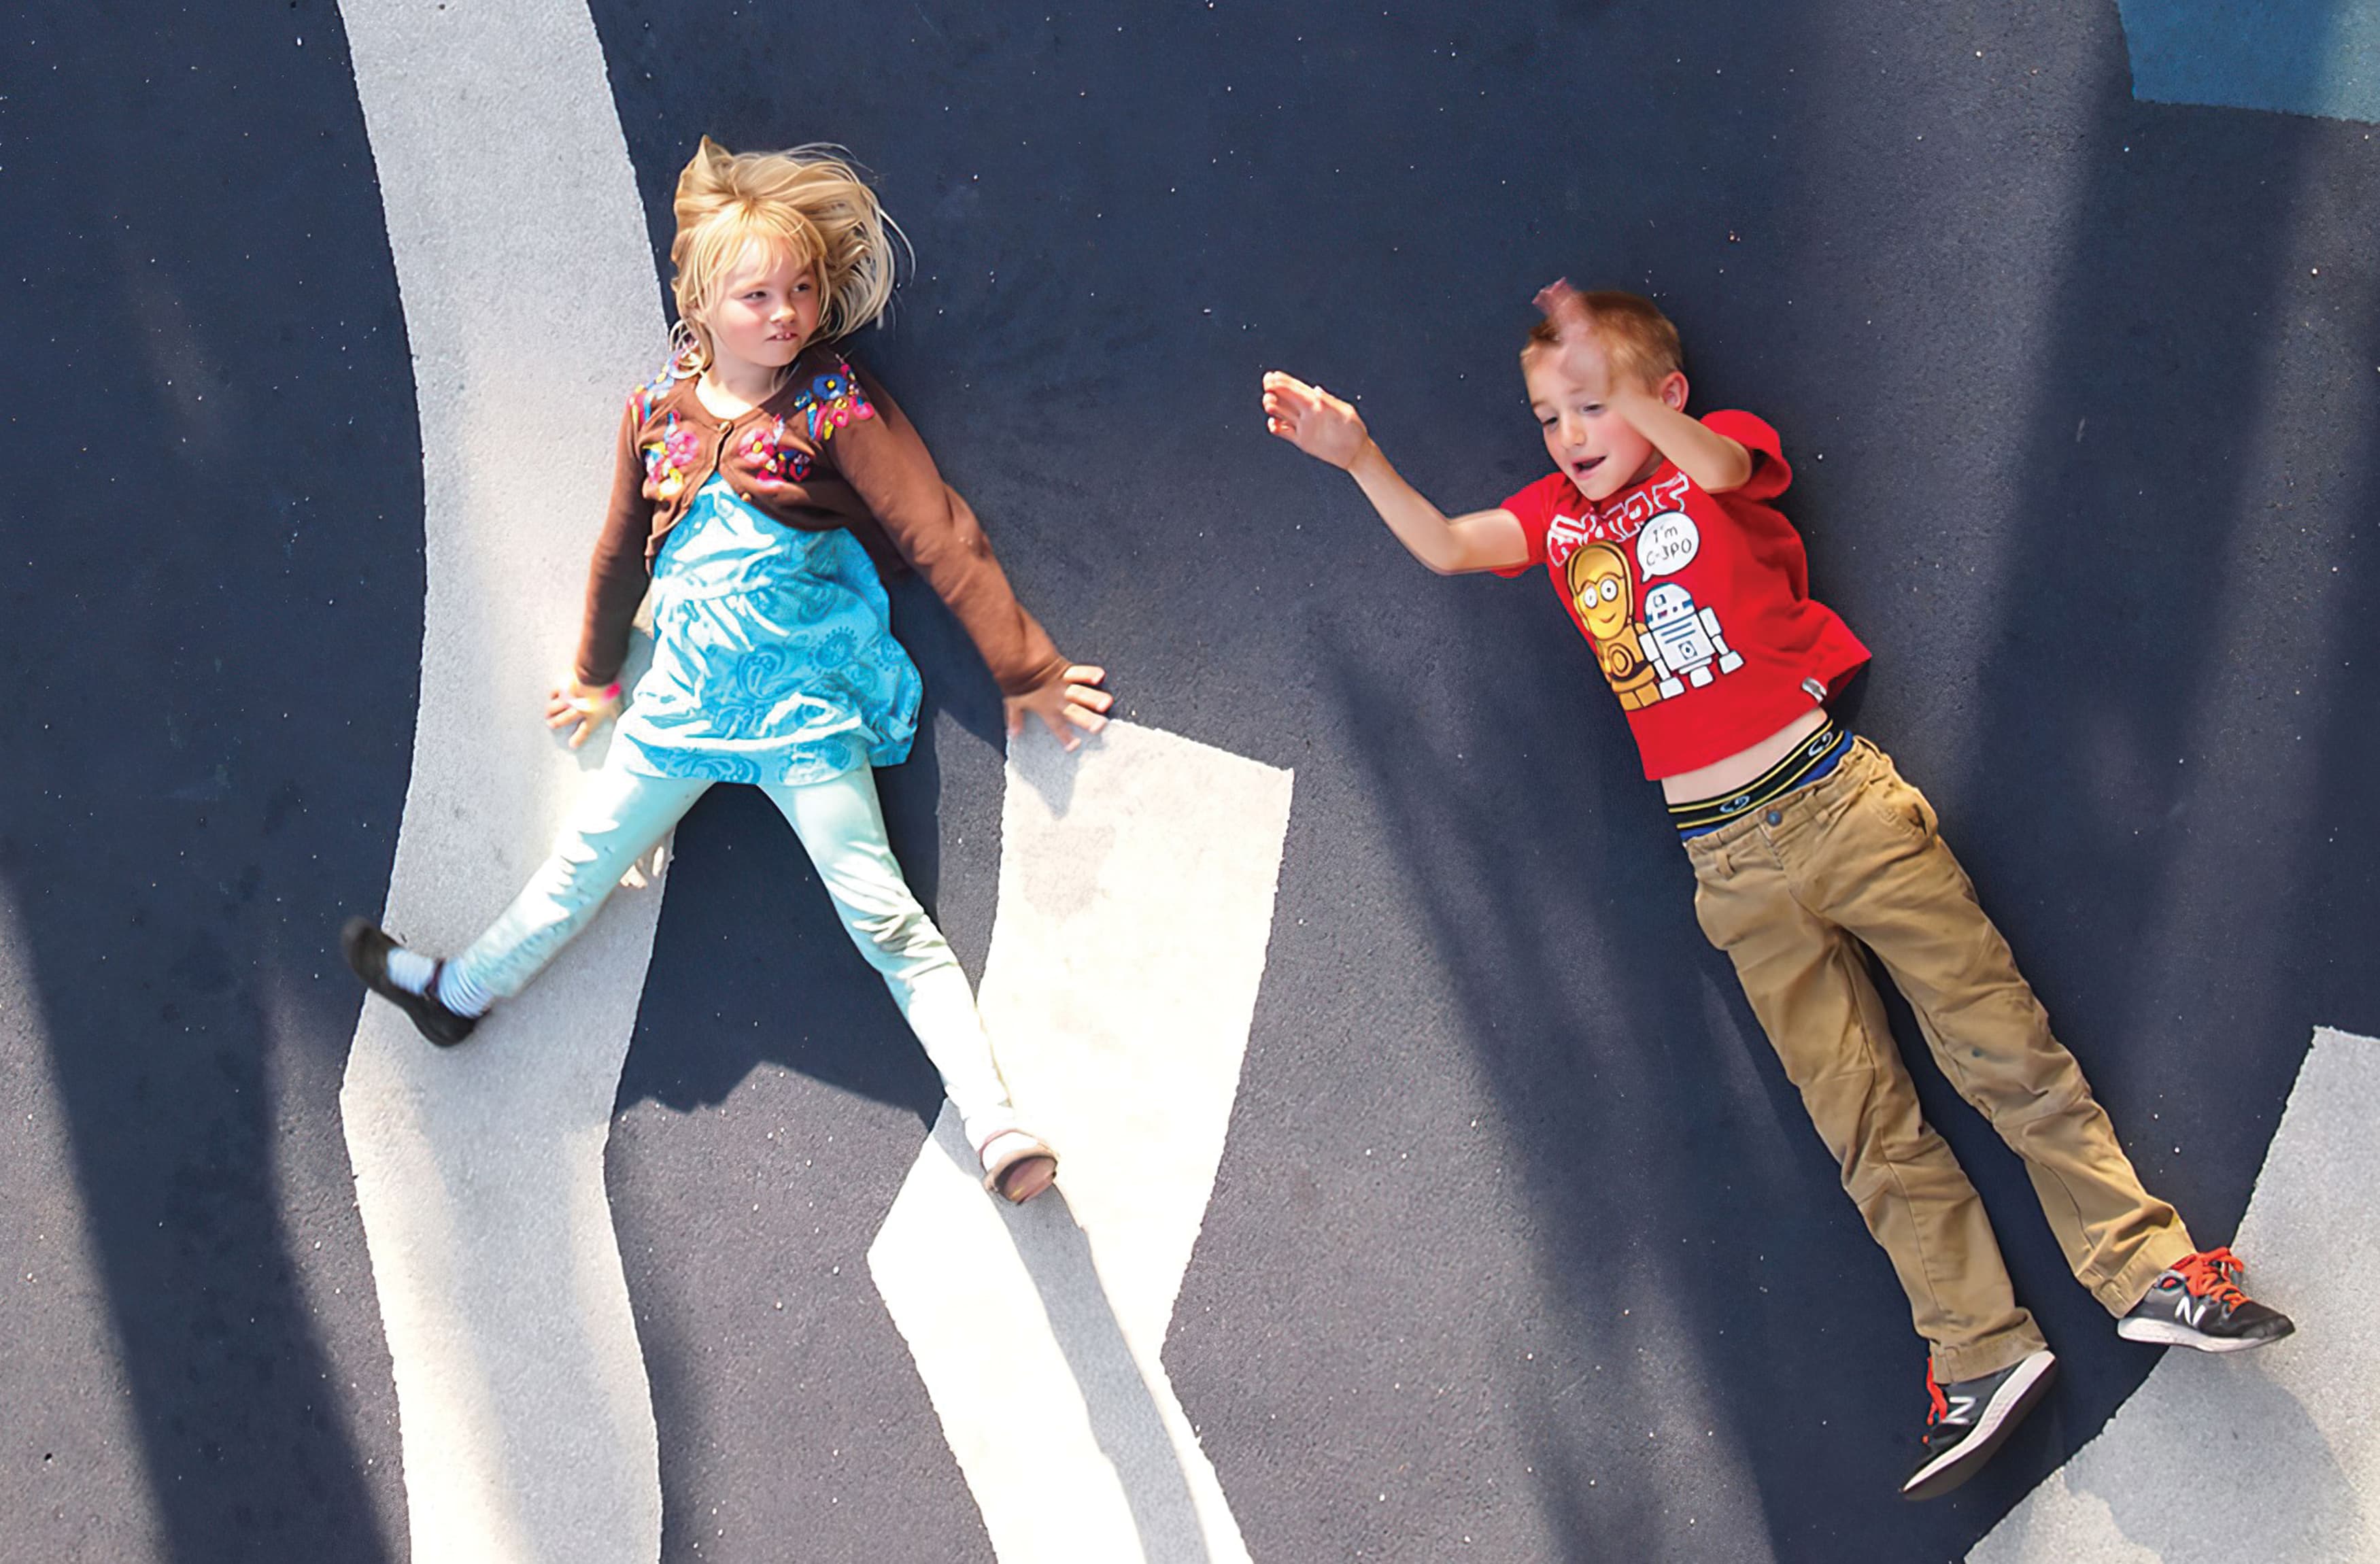 Children playing in an area with painted pavement graphics.